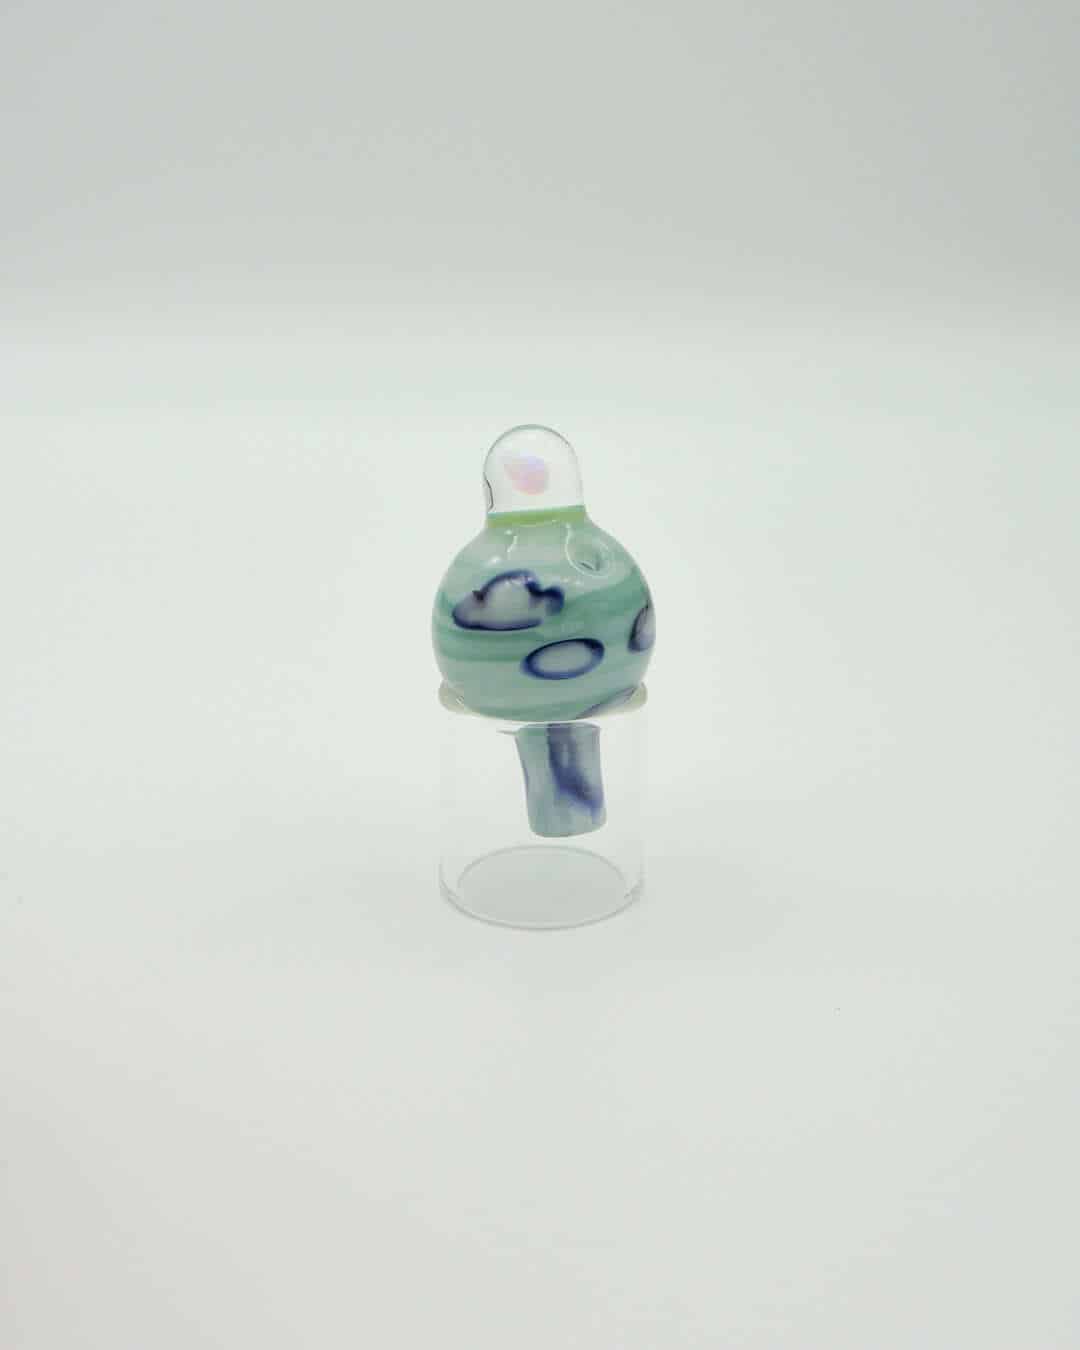 premium quality design of the Green Cloud Bubble Carb Cap by Gnarla Carla